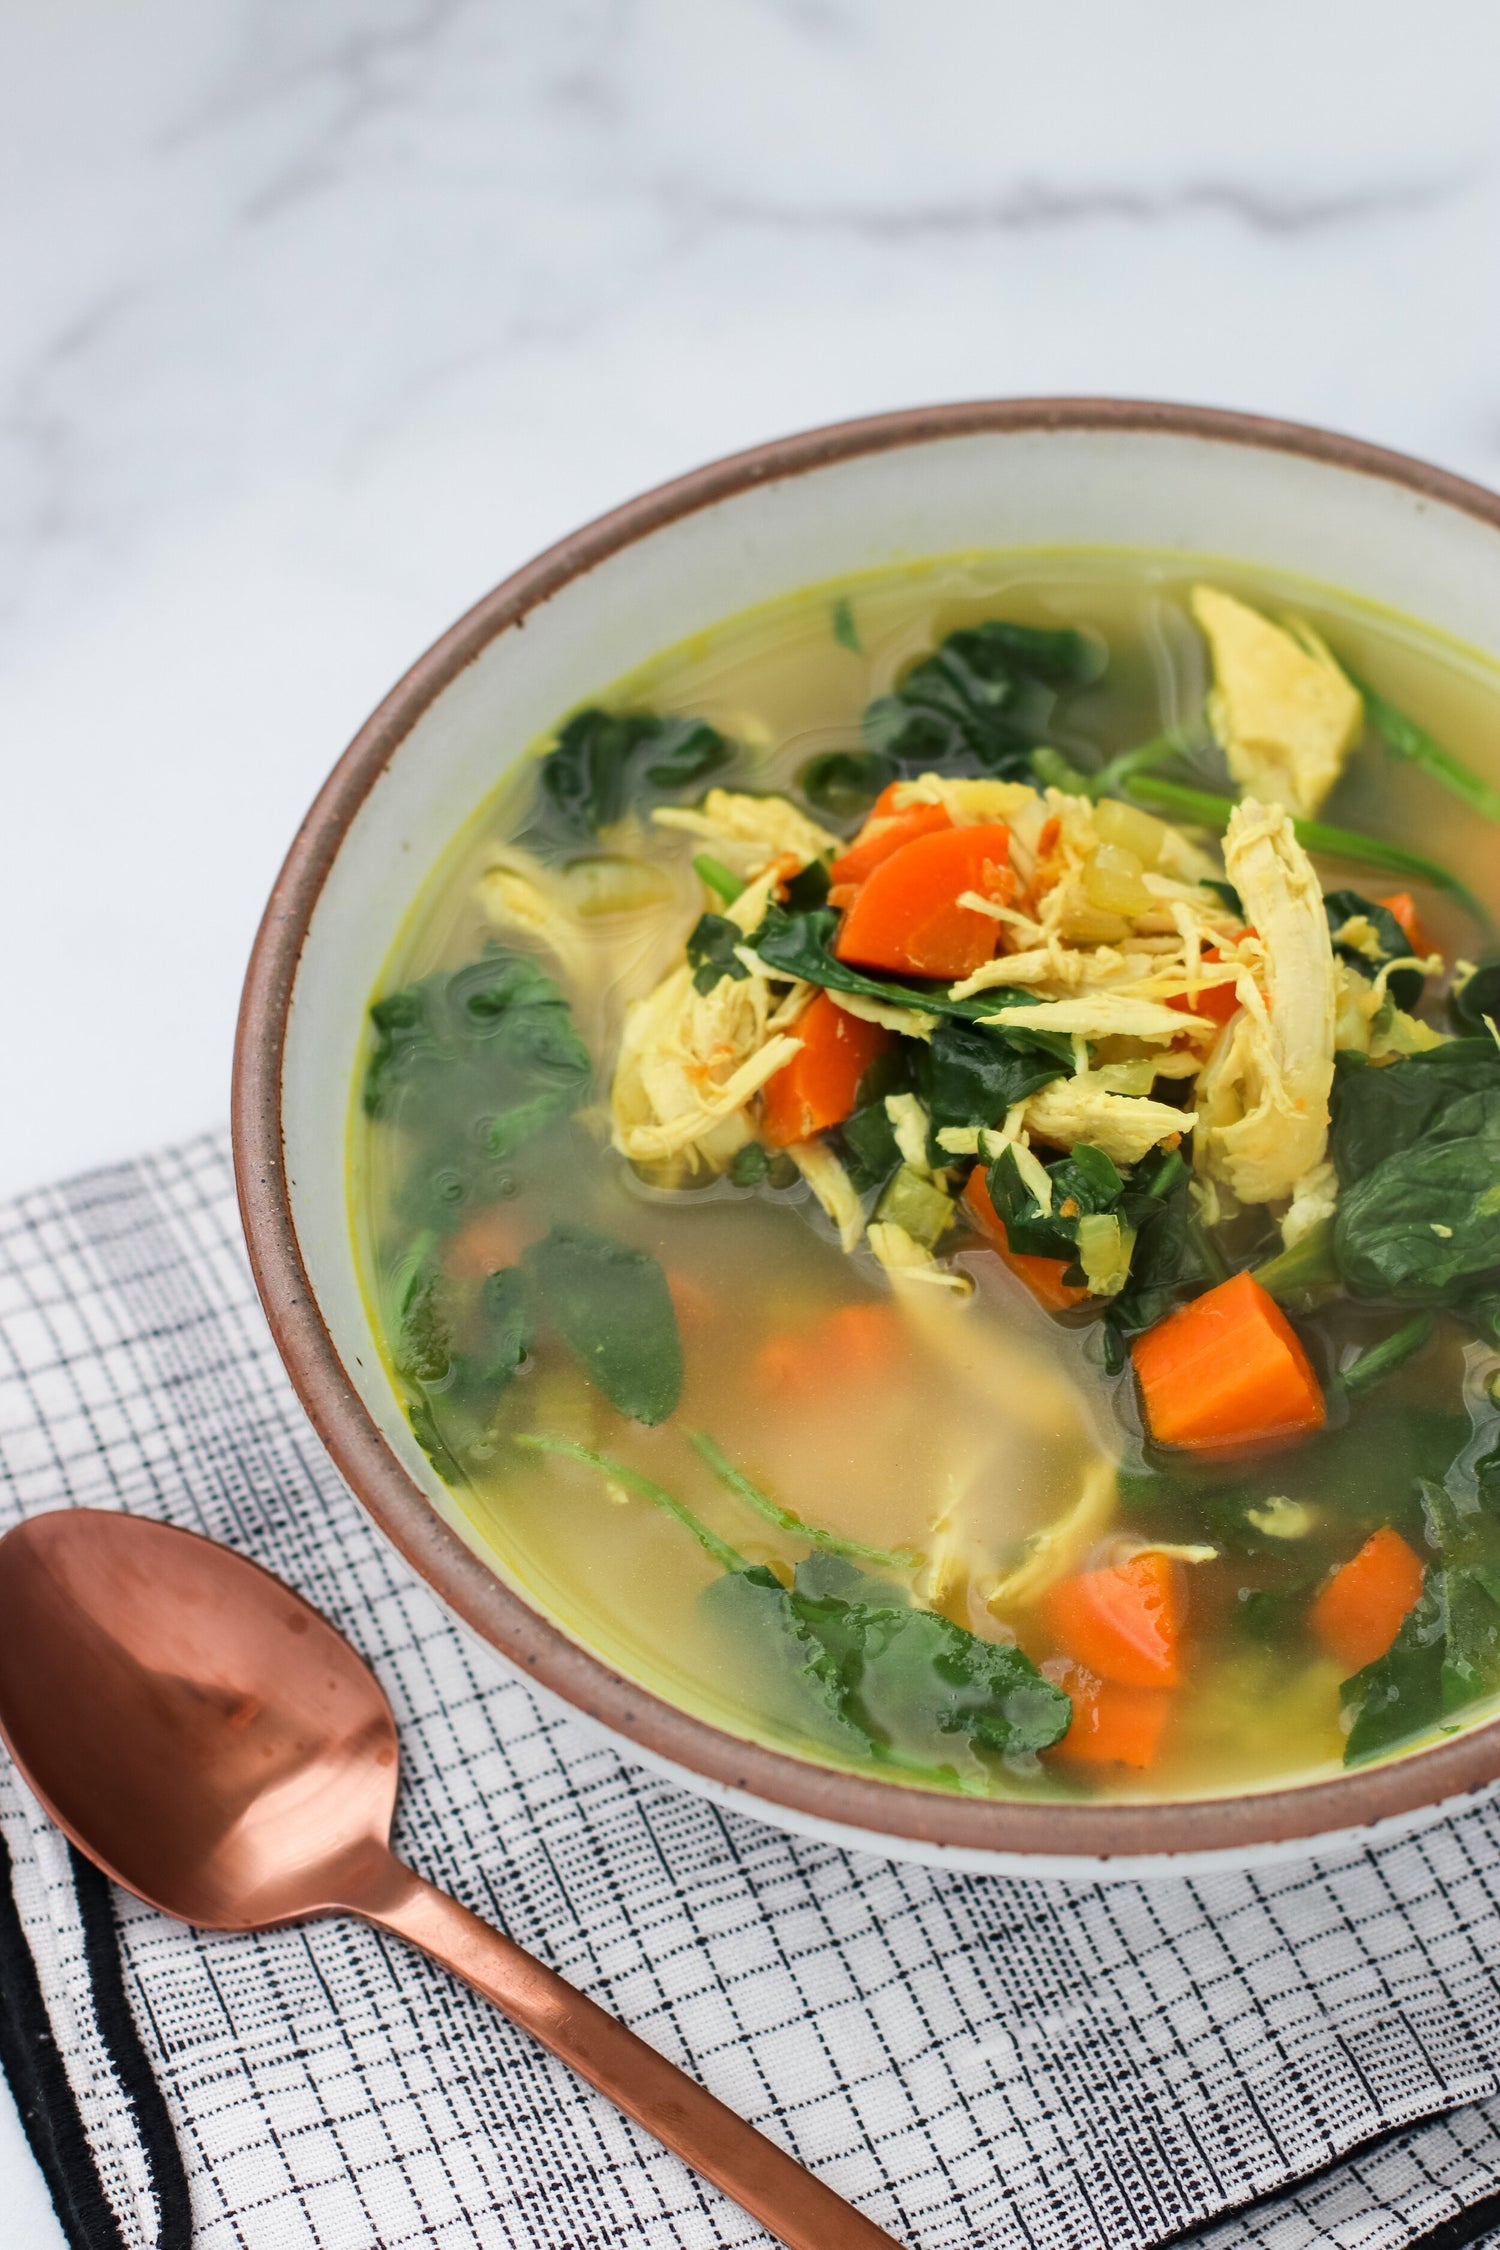 Immune-Boosting Turmeric Ginger Chicken (or Chickpea) Soup